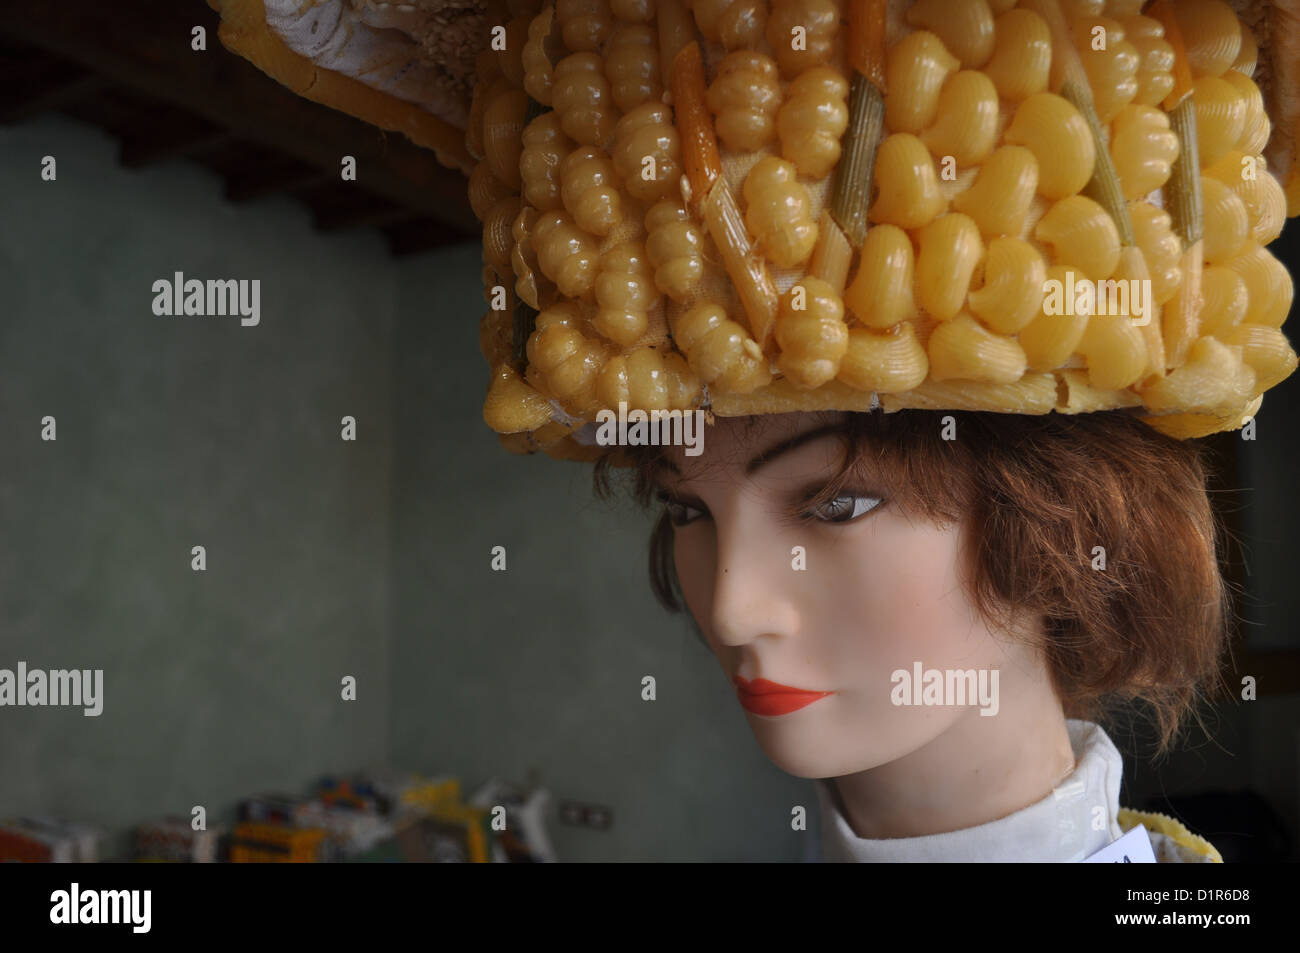 Longiano (Forlì-Cesena, Italy): hat made with pasta, displayed during a fair of ‘strange things’ Stock Photo